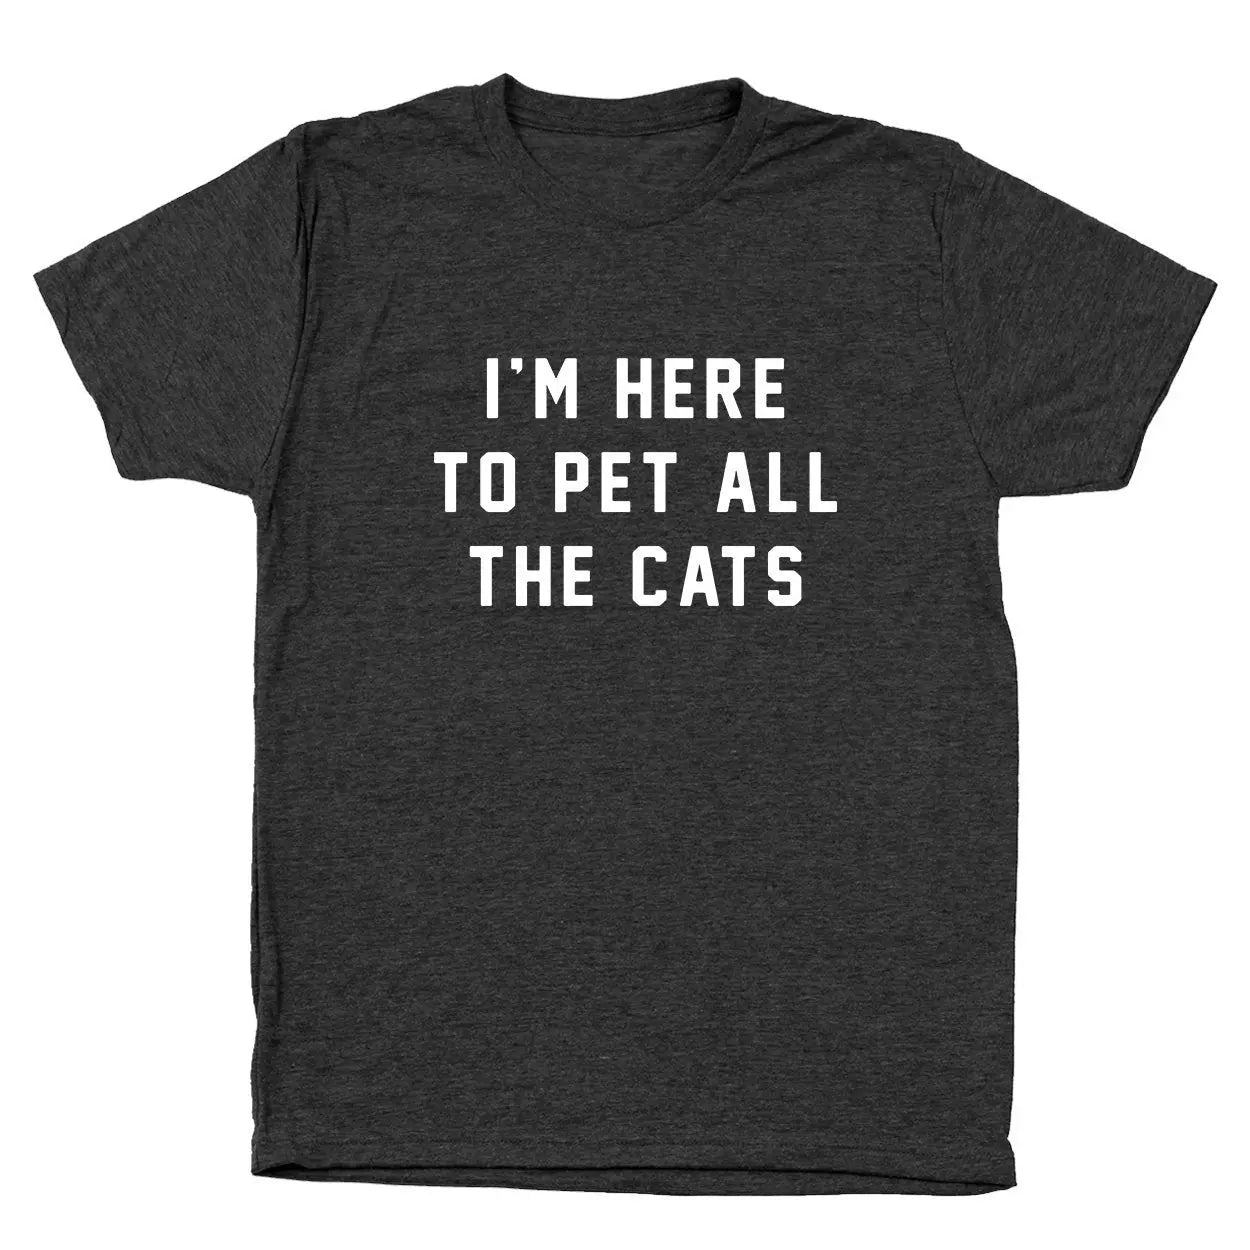 I'm Here To Pet All The Cats Tshirt - Donkey Tees